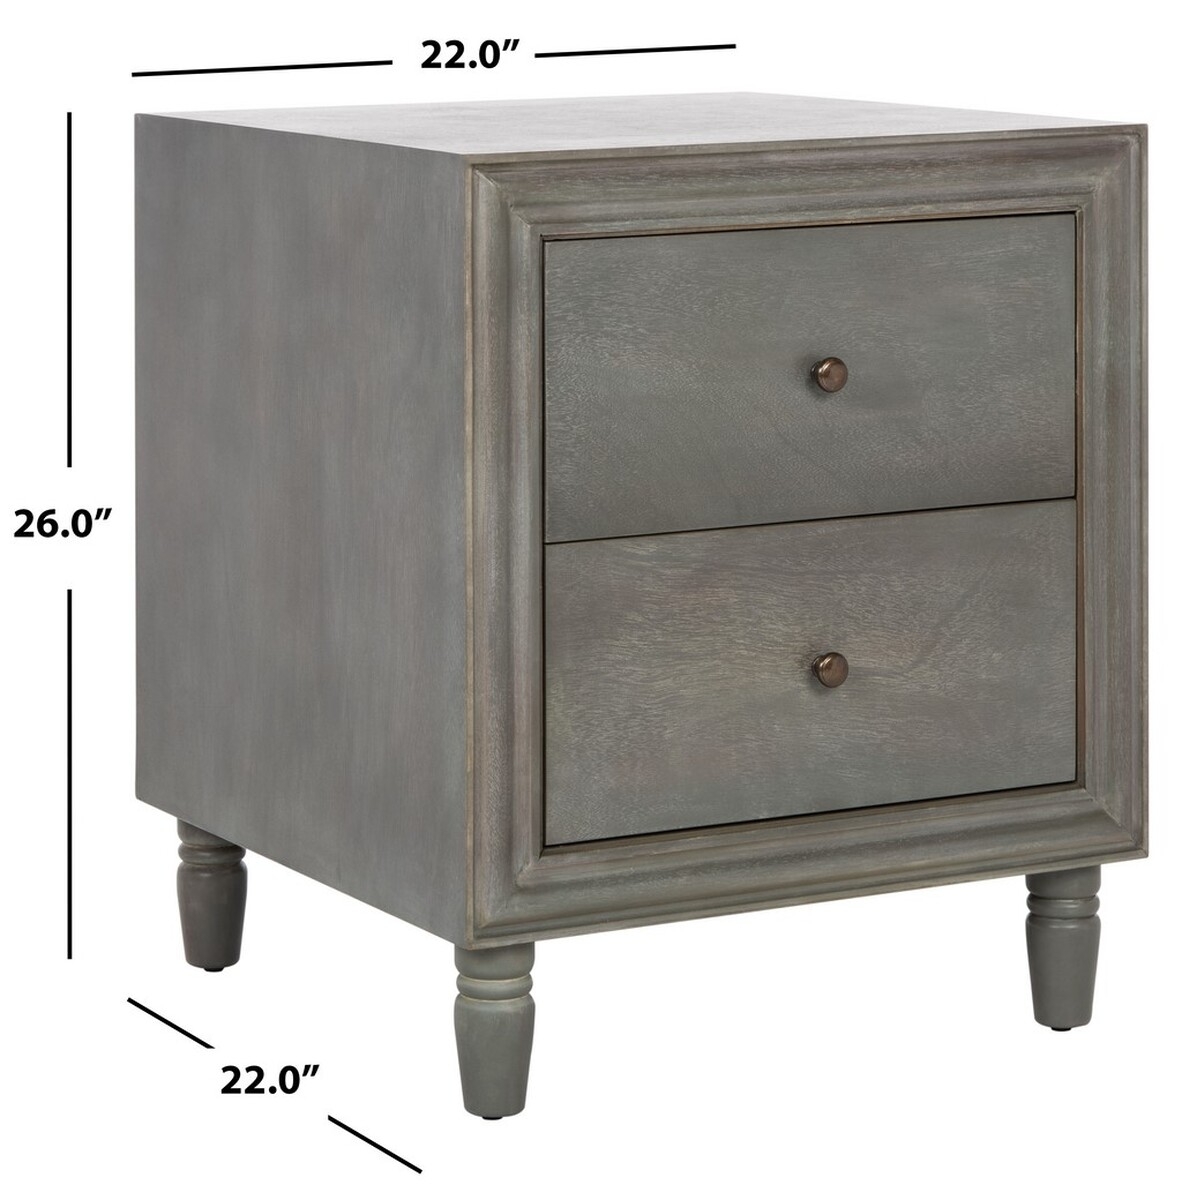 Blaise Nightstand With Storage Drawers - French Grey - Arlo Home - Image 1